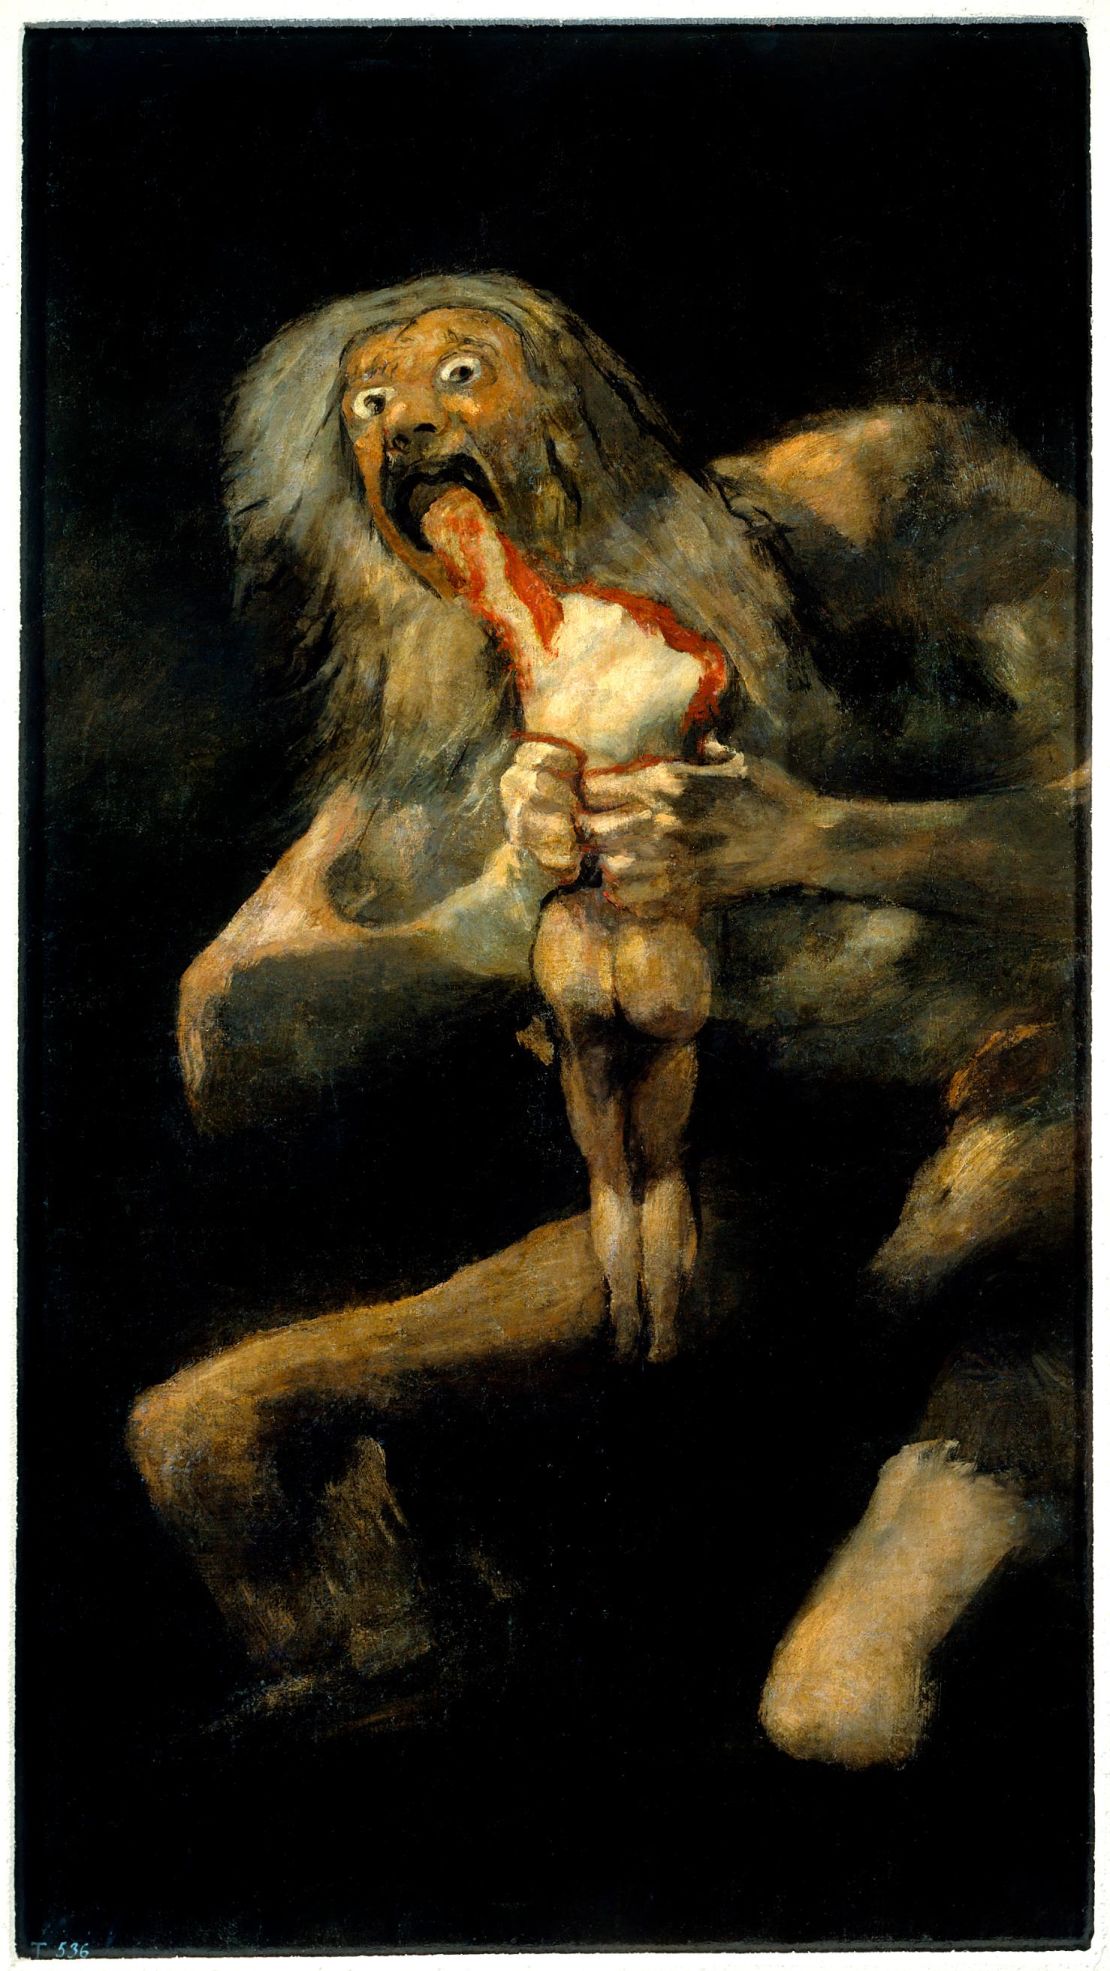 "Saturn Devouring His Son" (1820-1823) by Francisco Goya. 